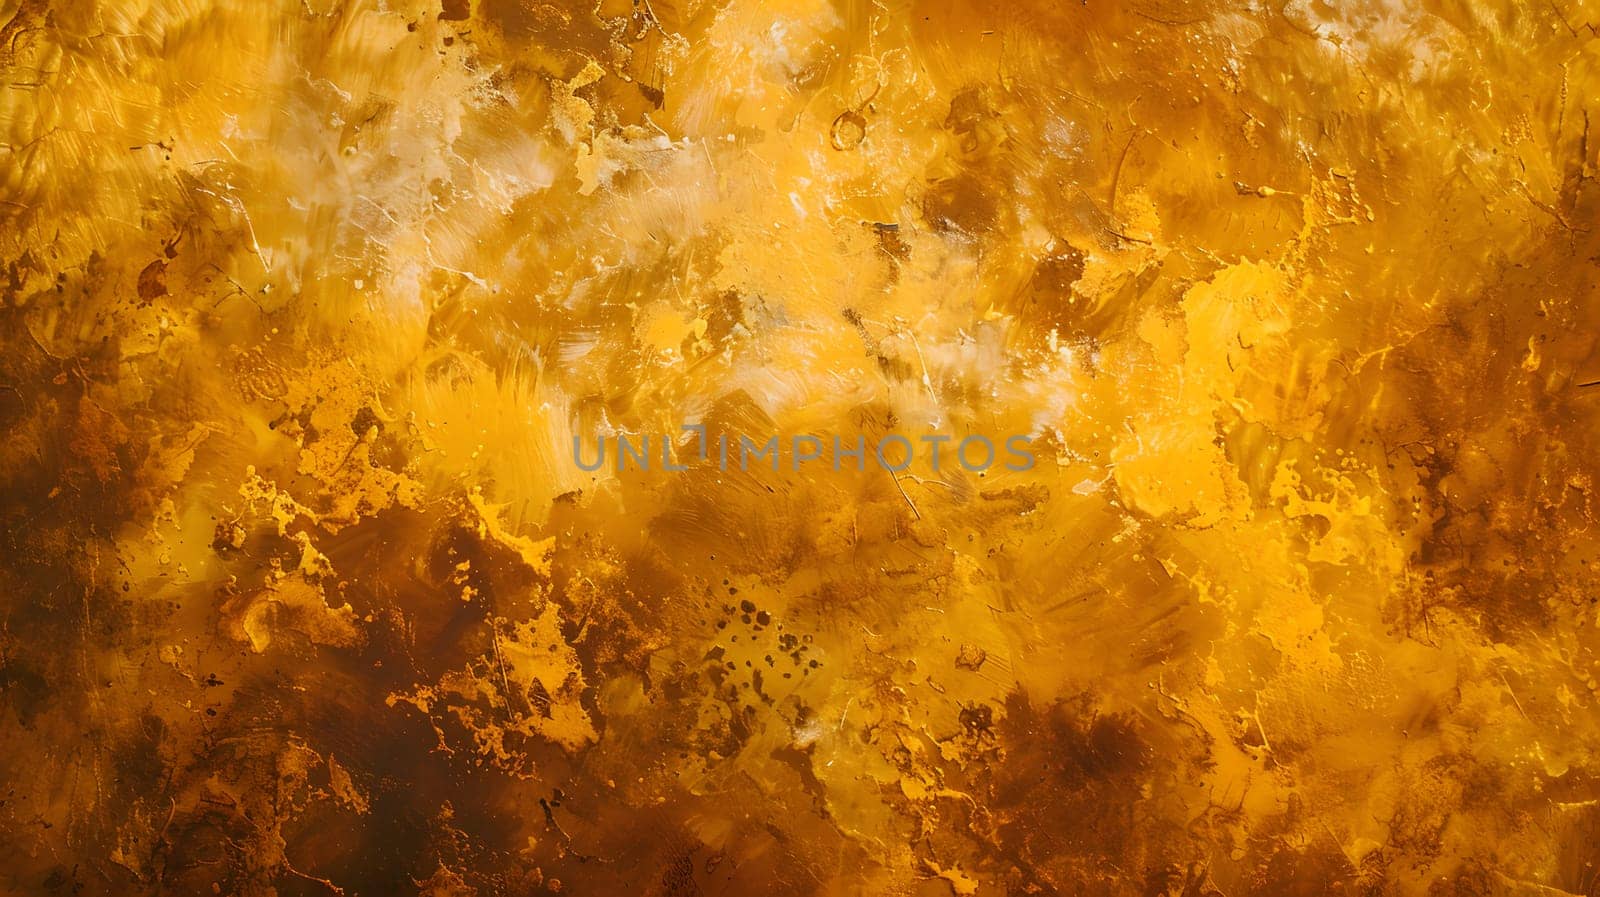 A closeup of a marble texture background in yellow and brown tones resembling the hues of amber in the sky. The heat from the flamelike patterns create an astronomical object art feel